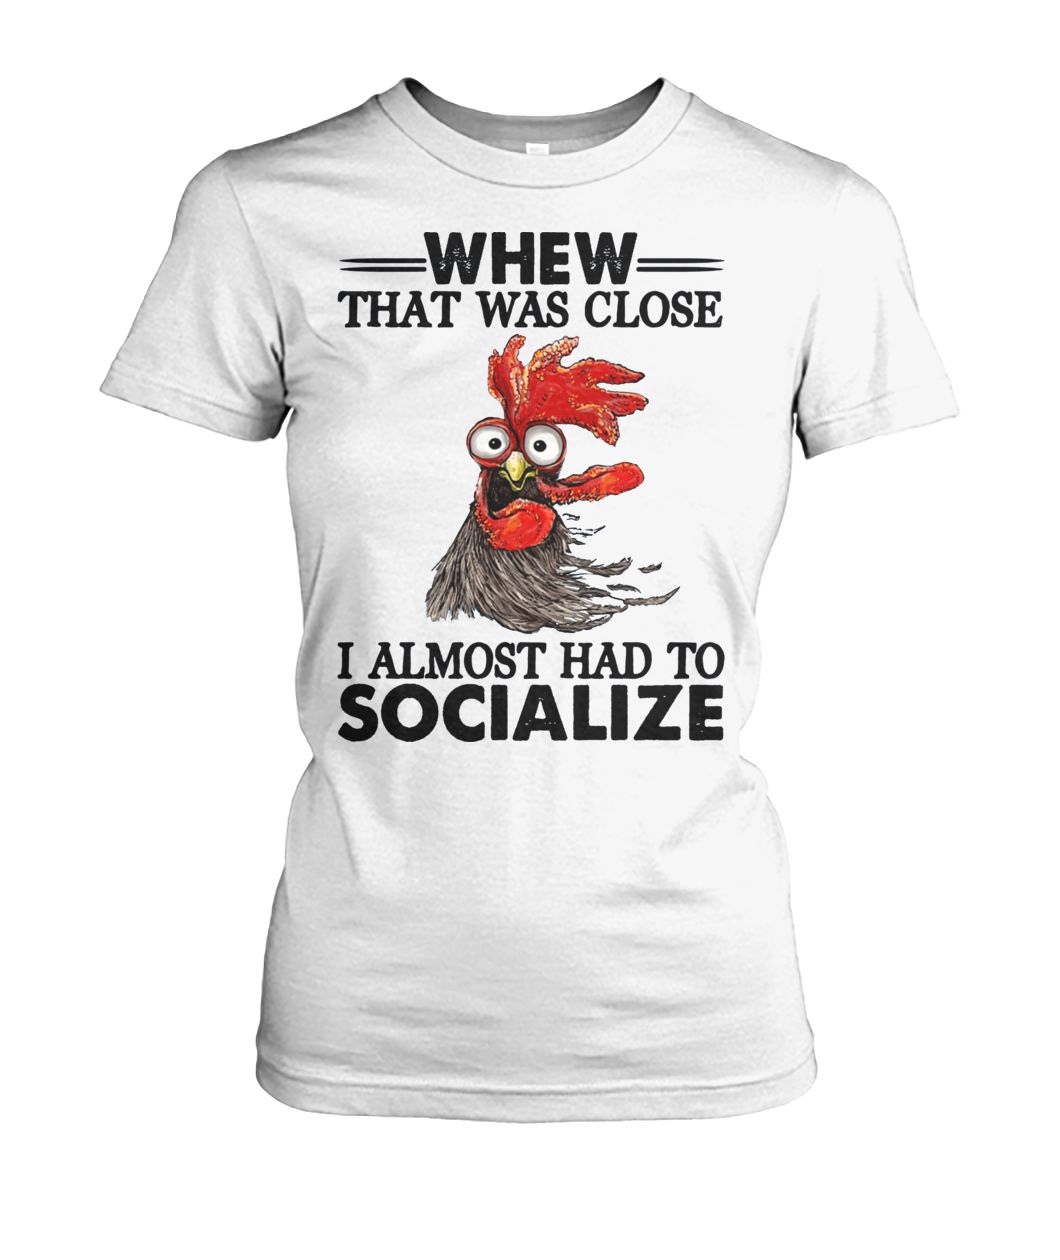 Rooster whew that was close I almost had to socialize women's crew tee